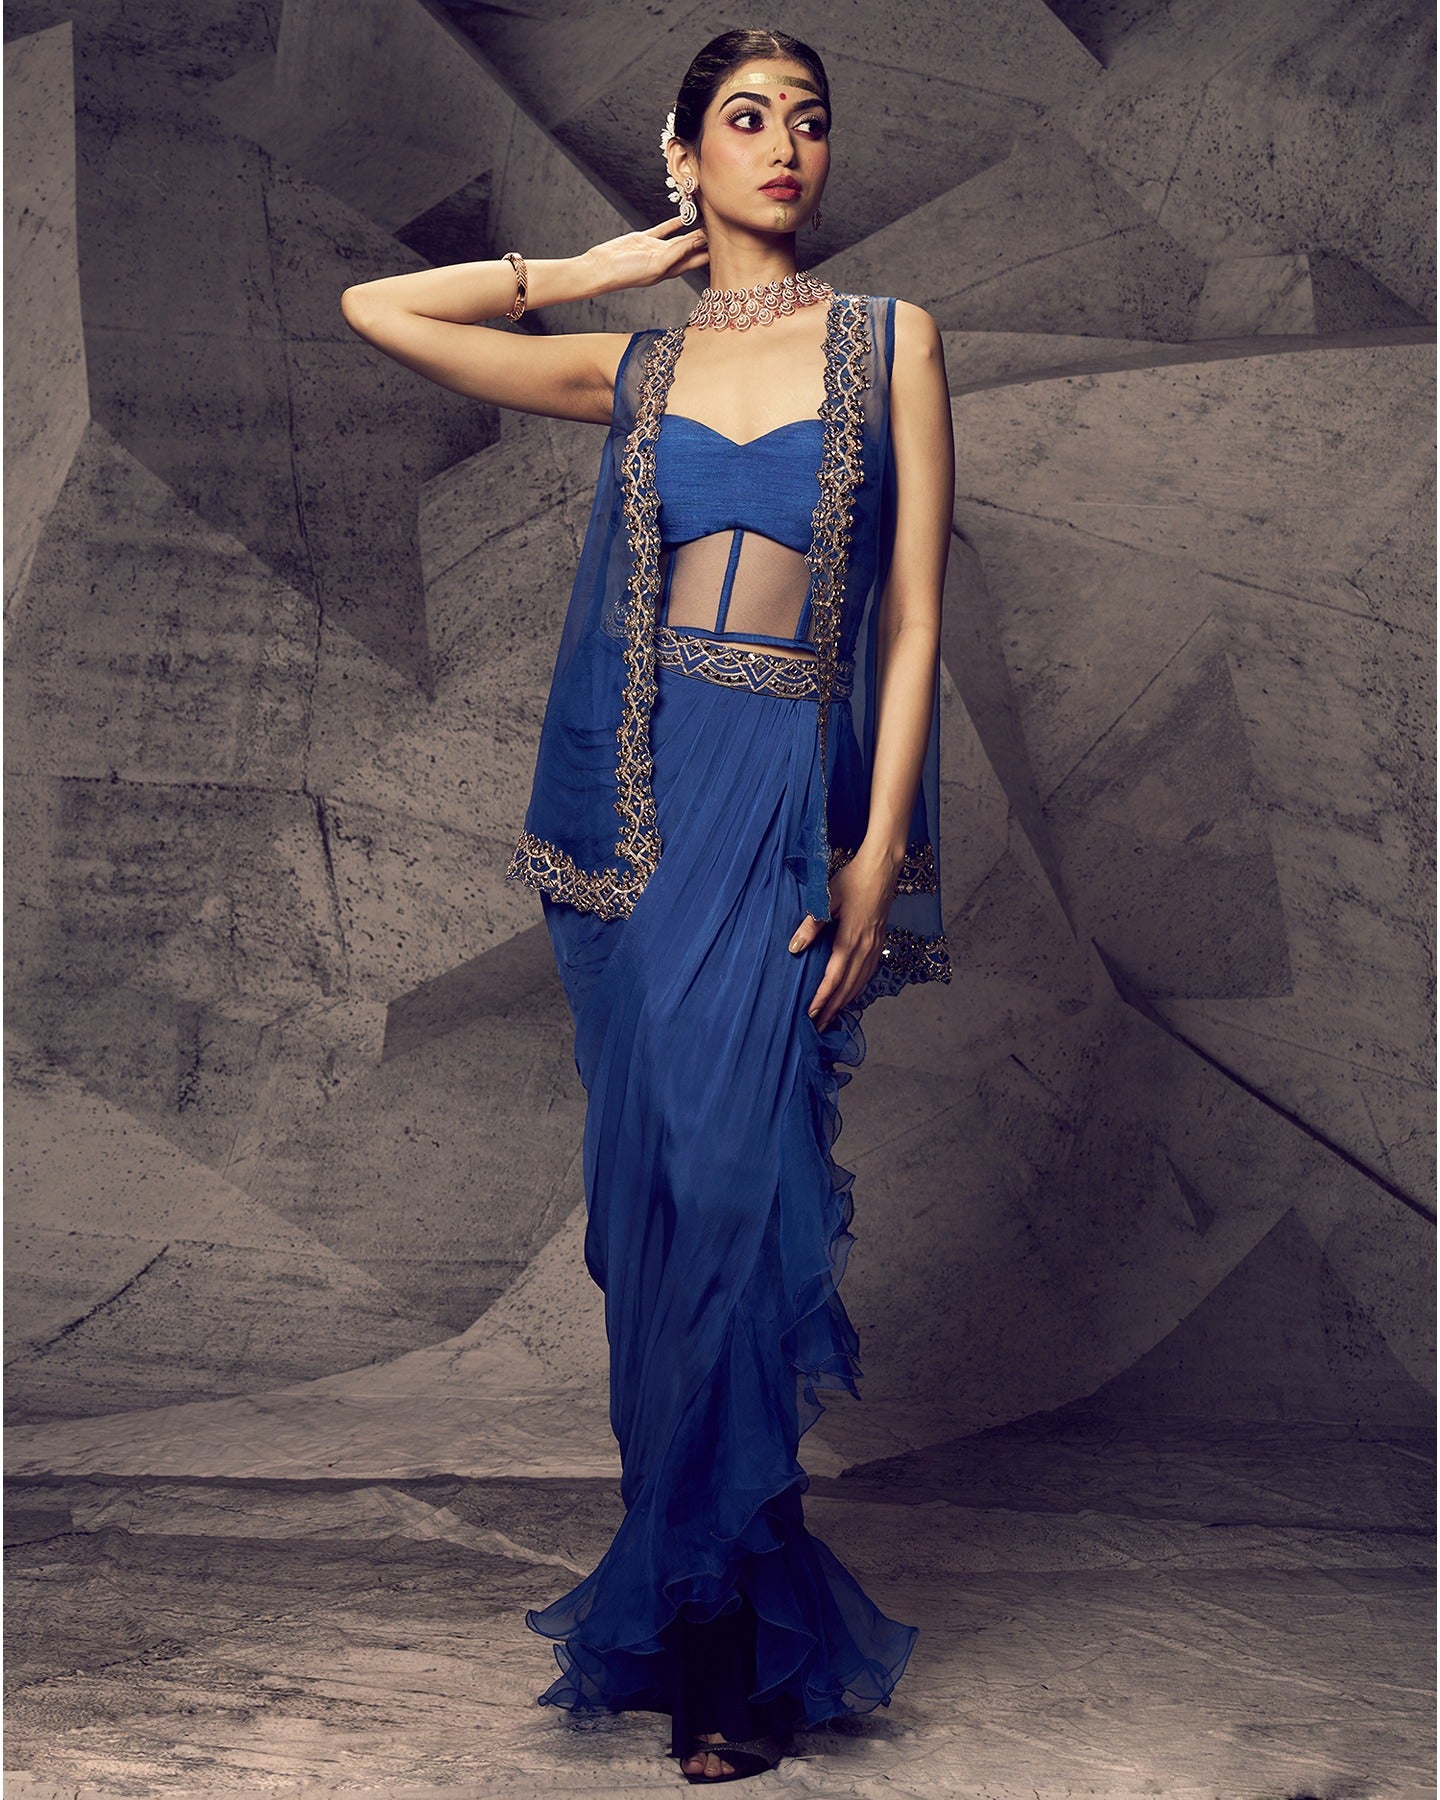 Drenched in bold blue hues and adorned with shimmering mirror work, this dhoti skirt and jacket ensemble is a modern symphony of elegance.